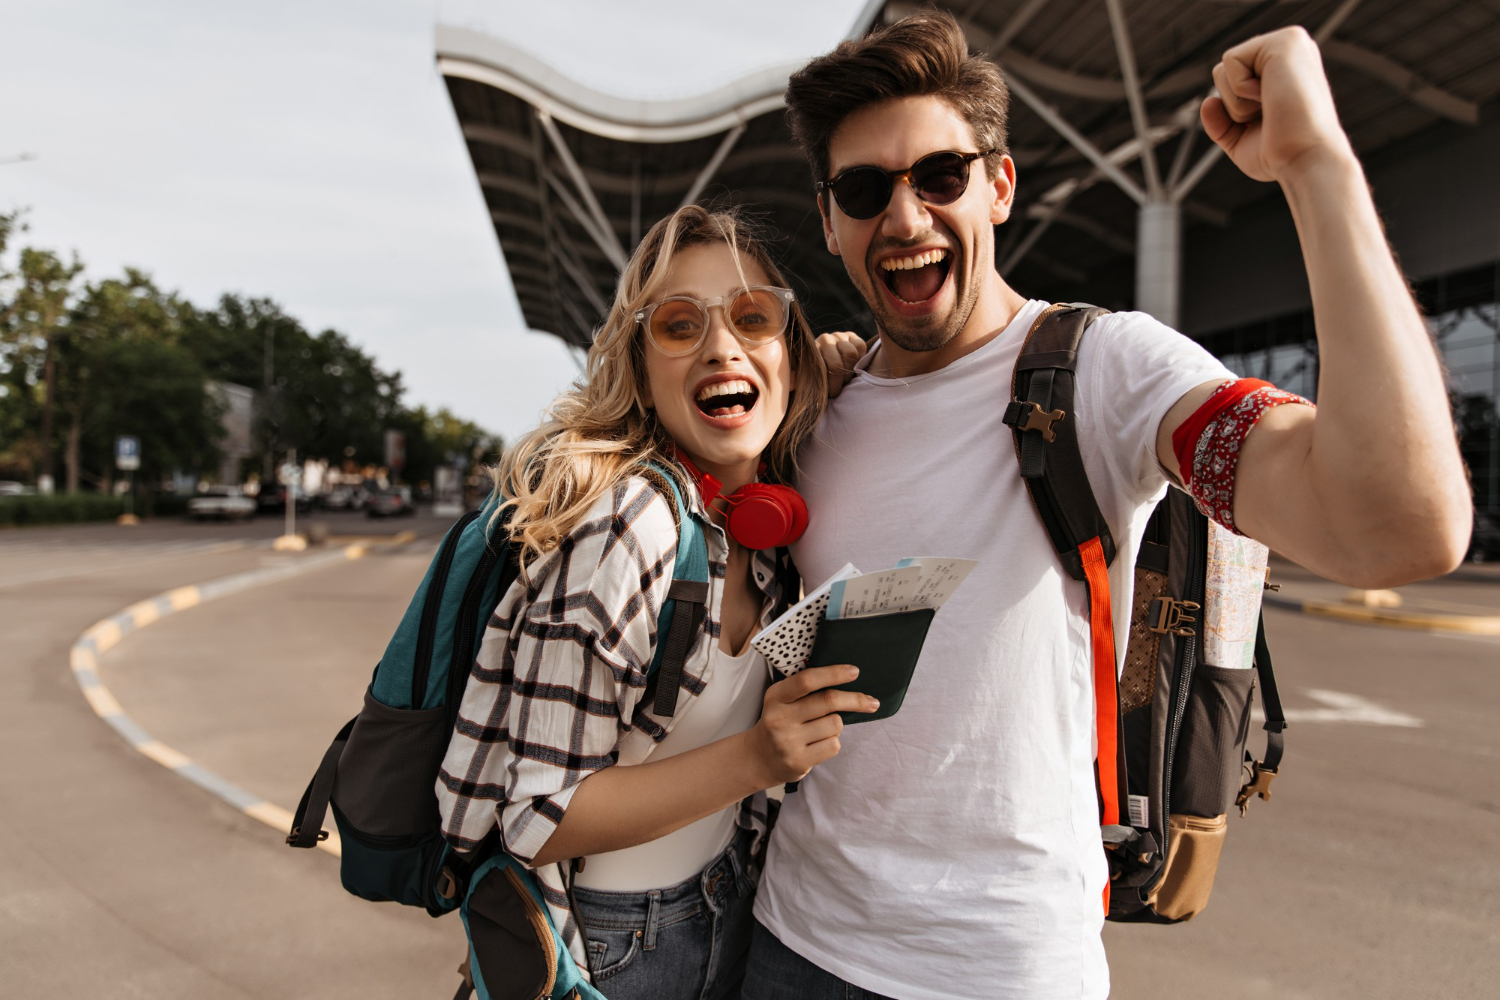 attractive blonde woman sunglasses man white tee smiles takes selfie near airport